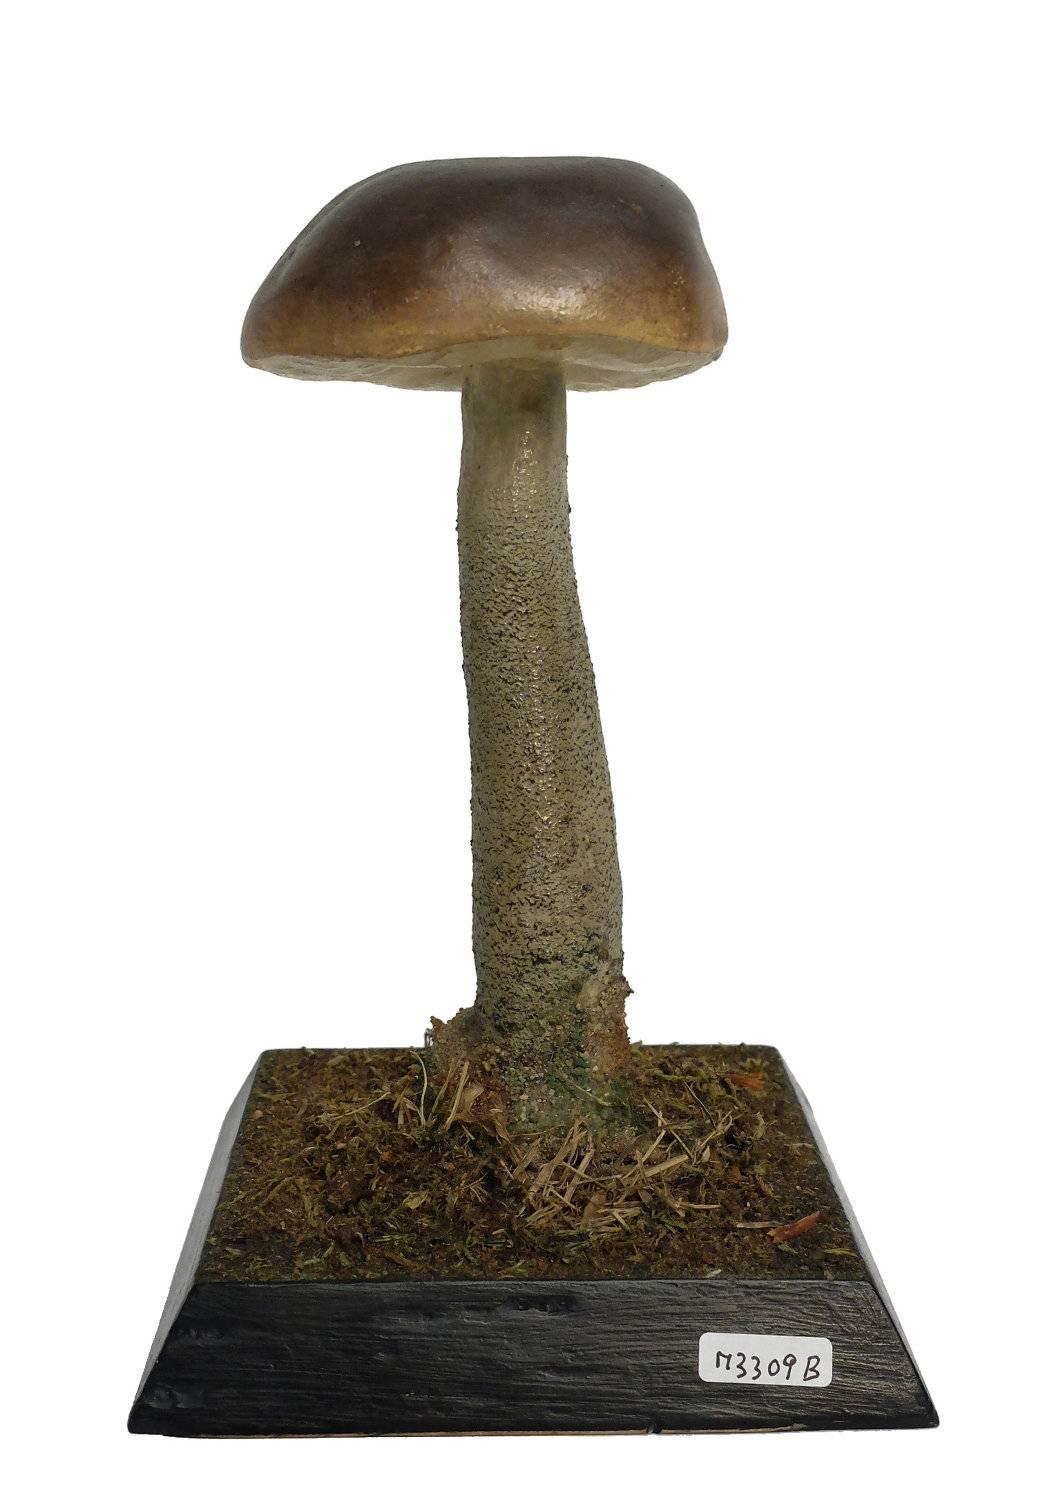 A model for pharmacy of mushroom specimen Leinium Diurusculum. Made out of plaster watercolored. Square wooden black base with moss and hay. It shows on the front one label with the scientific name of the specimen handwritten with ink.